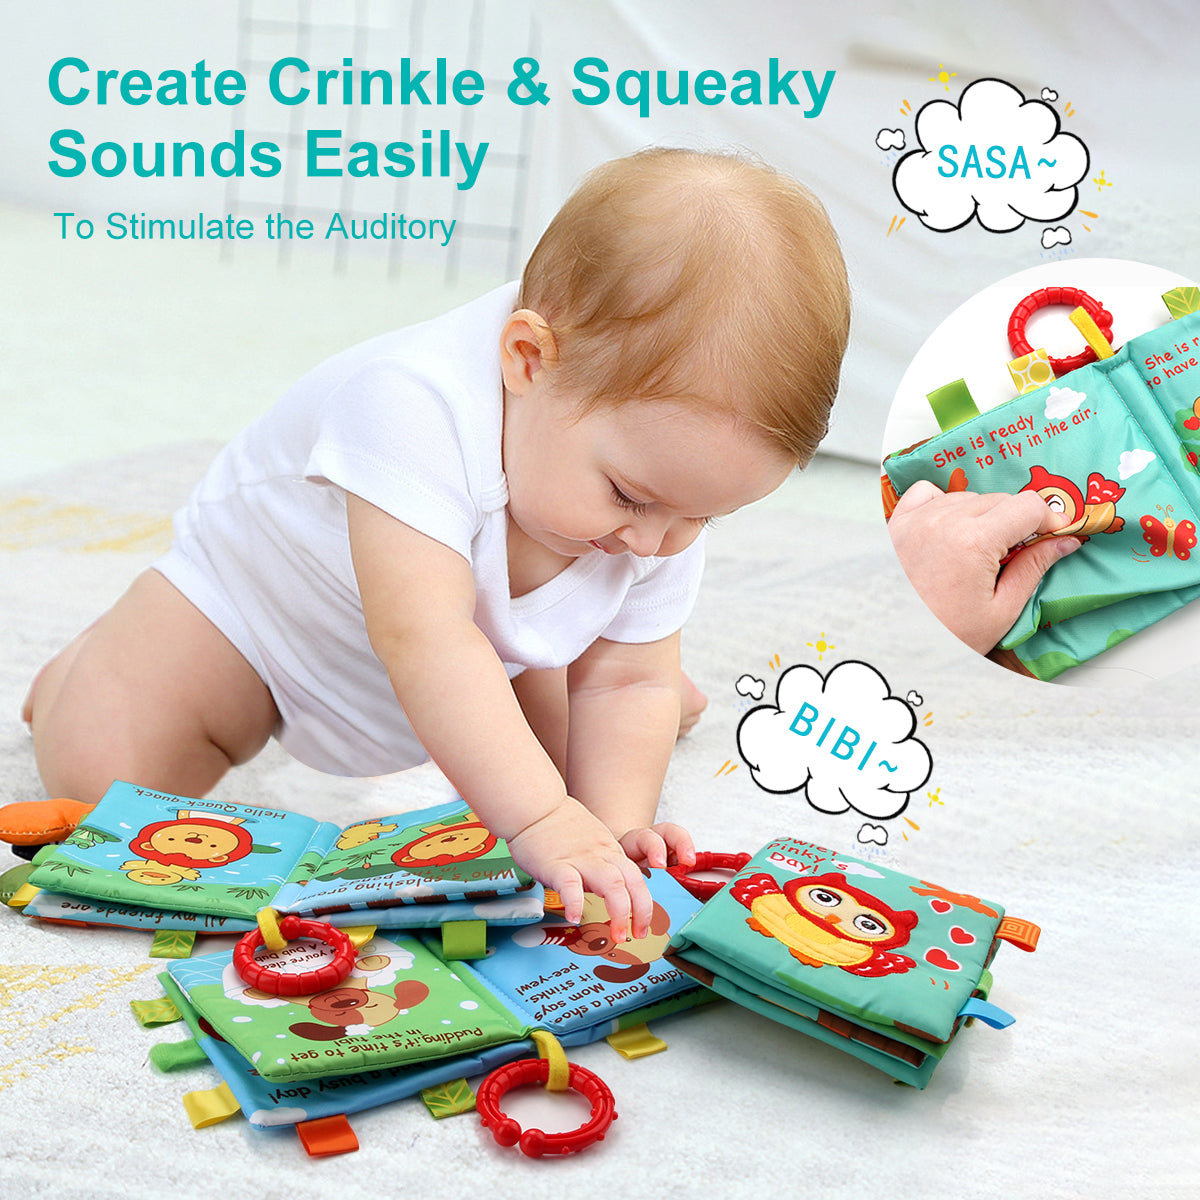 Joyfia Baby Soft Books, High Contrast Baby Book for Newborns, Touch and Feel Soft Crinkle Cloth Books, Development Toys for Infants 0-12 Months, On-The-Go Travel Activity Toy for Boys Girls (4Pack)